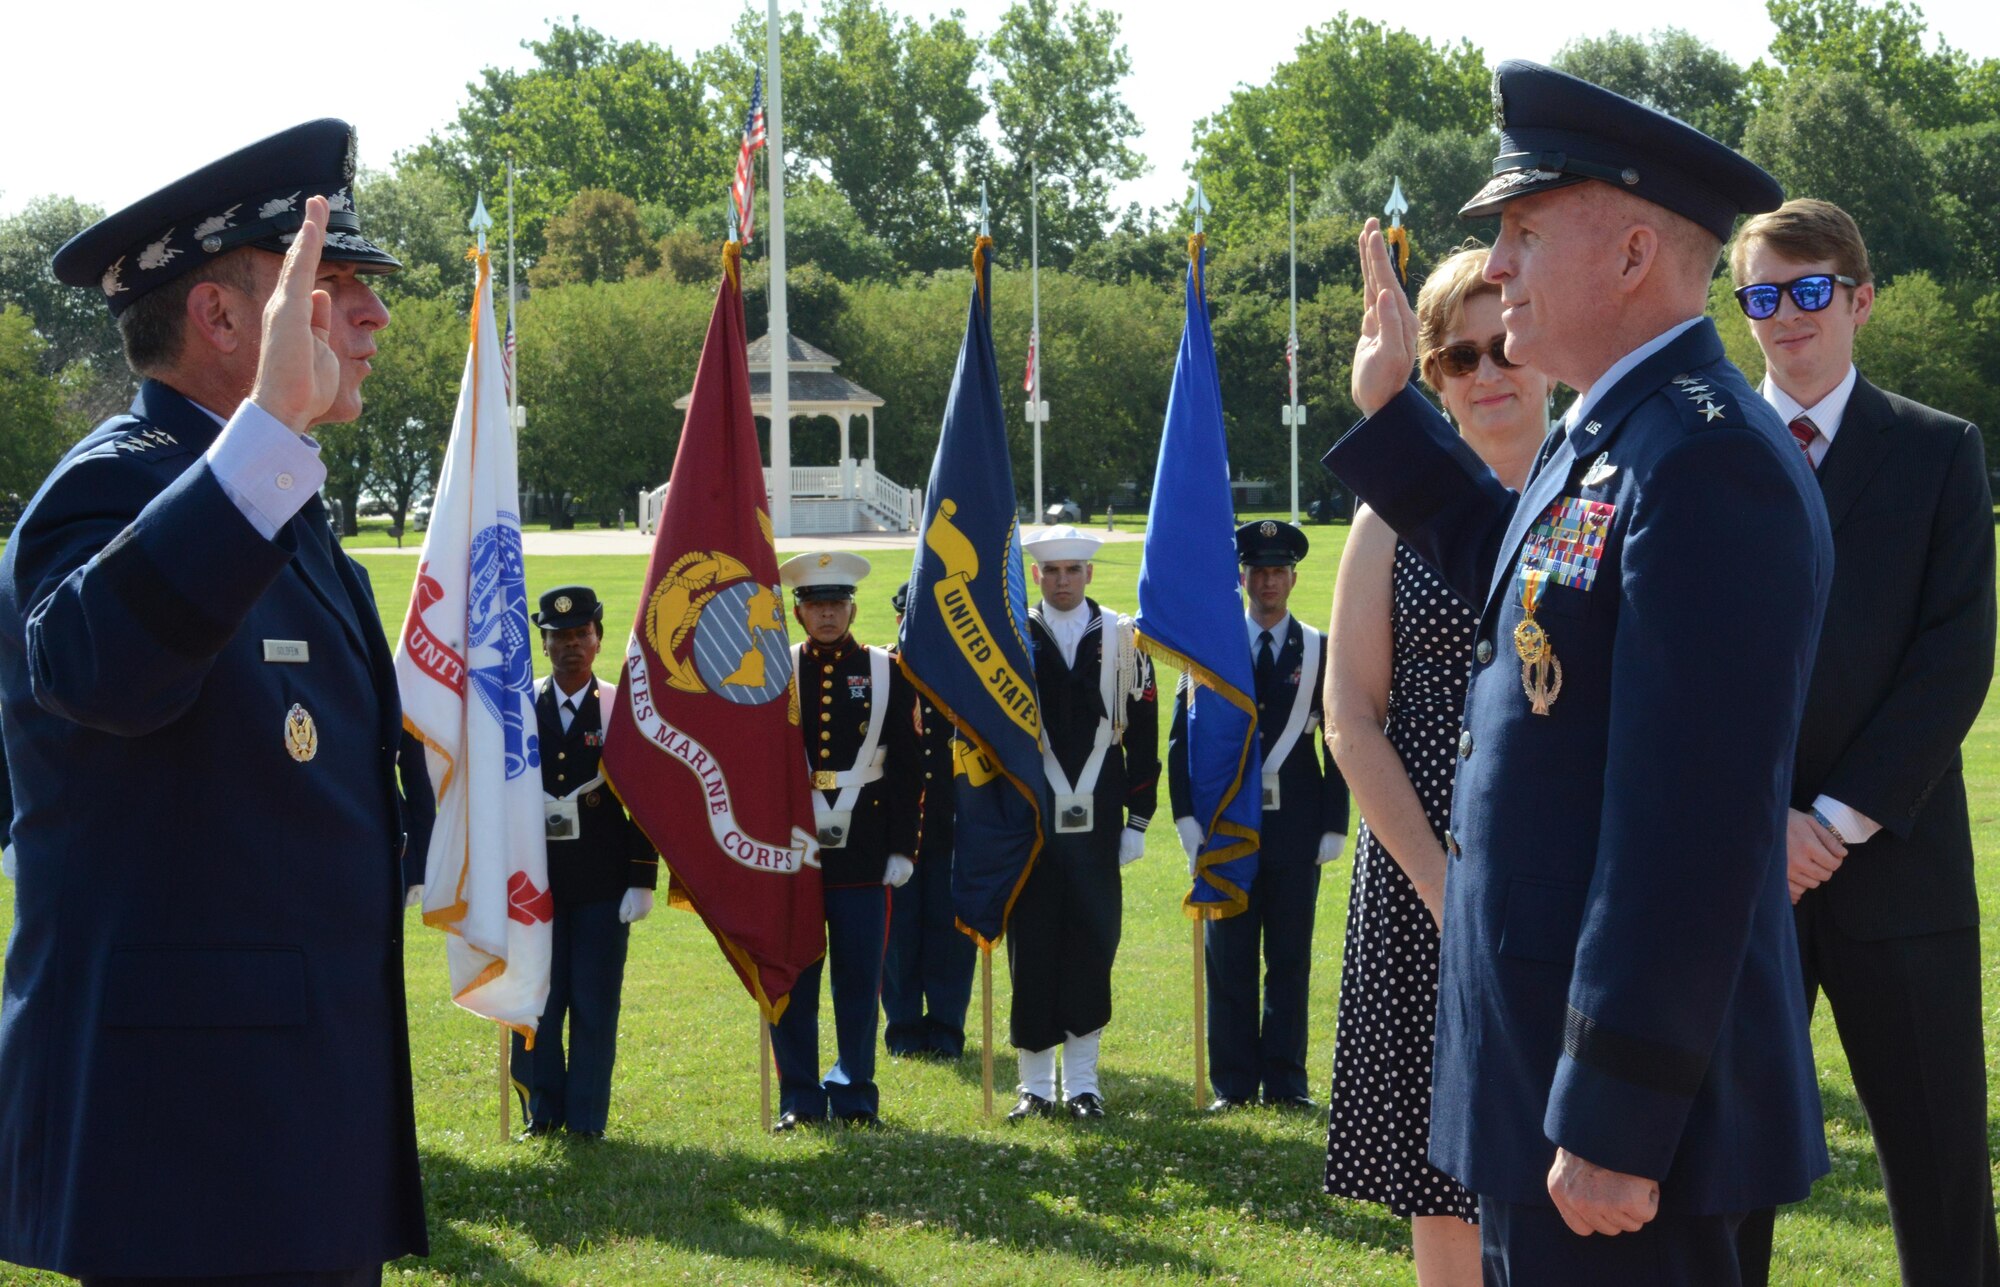 Air Force Chief of Staff Gen. David L. Goldfein administers the oath for Gen. Stephen W. Wilson, the U.S. Strategic Command deputy commander, at Offutt Air Force Base, Neb., July 22, 2016. Goldfein, who presided over the ceremony, said that Wilson had the competence and character required to be promoted to the rank of general and hold the position of 39th vice chief of staff of the Air Force. (U.S. Air Force photo/Master Sgt. April Wickes) 